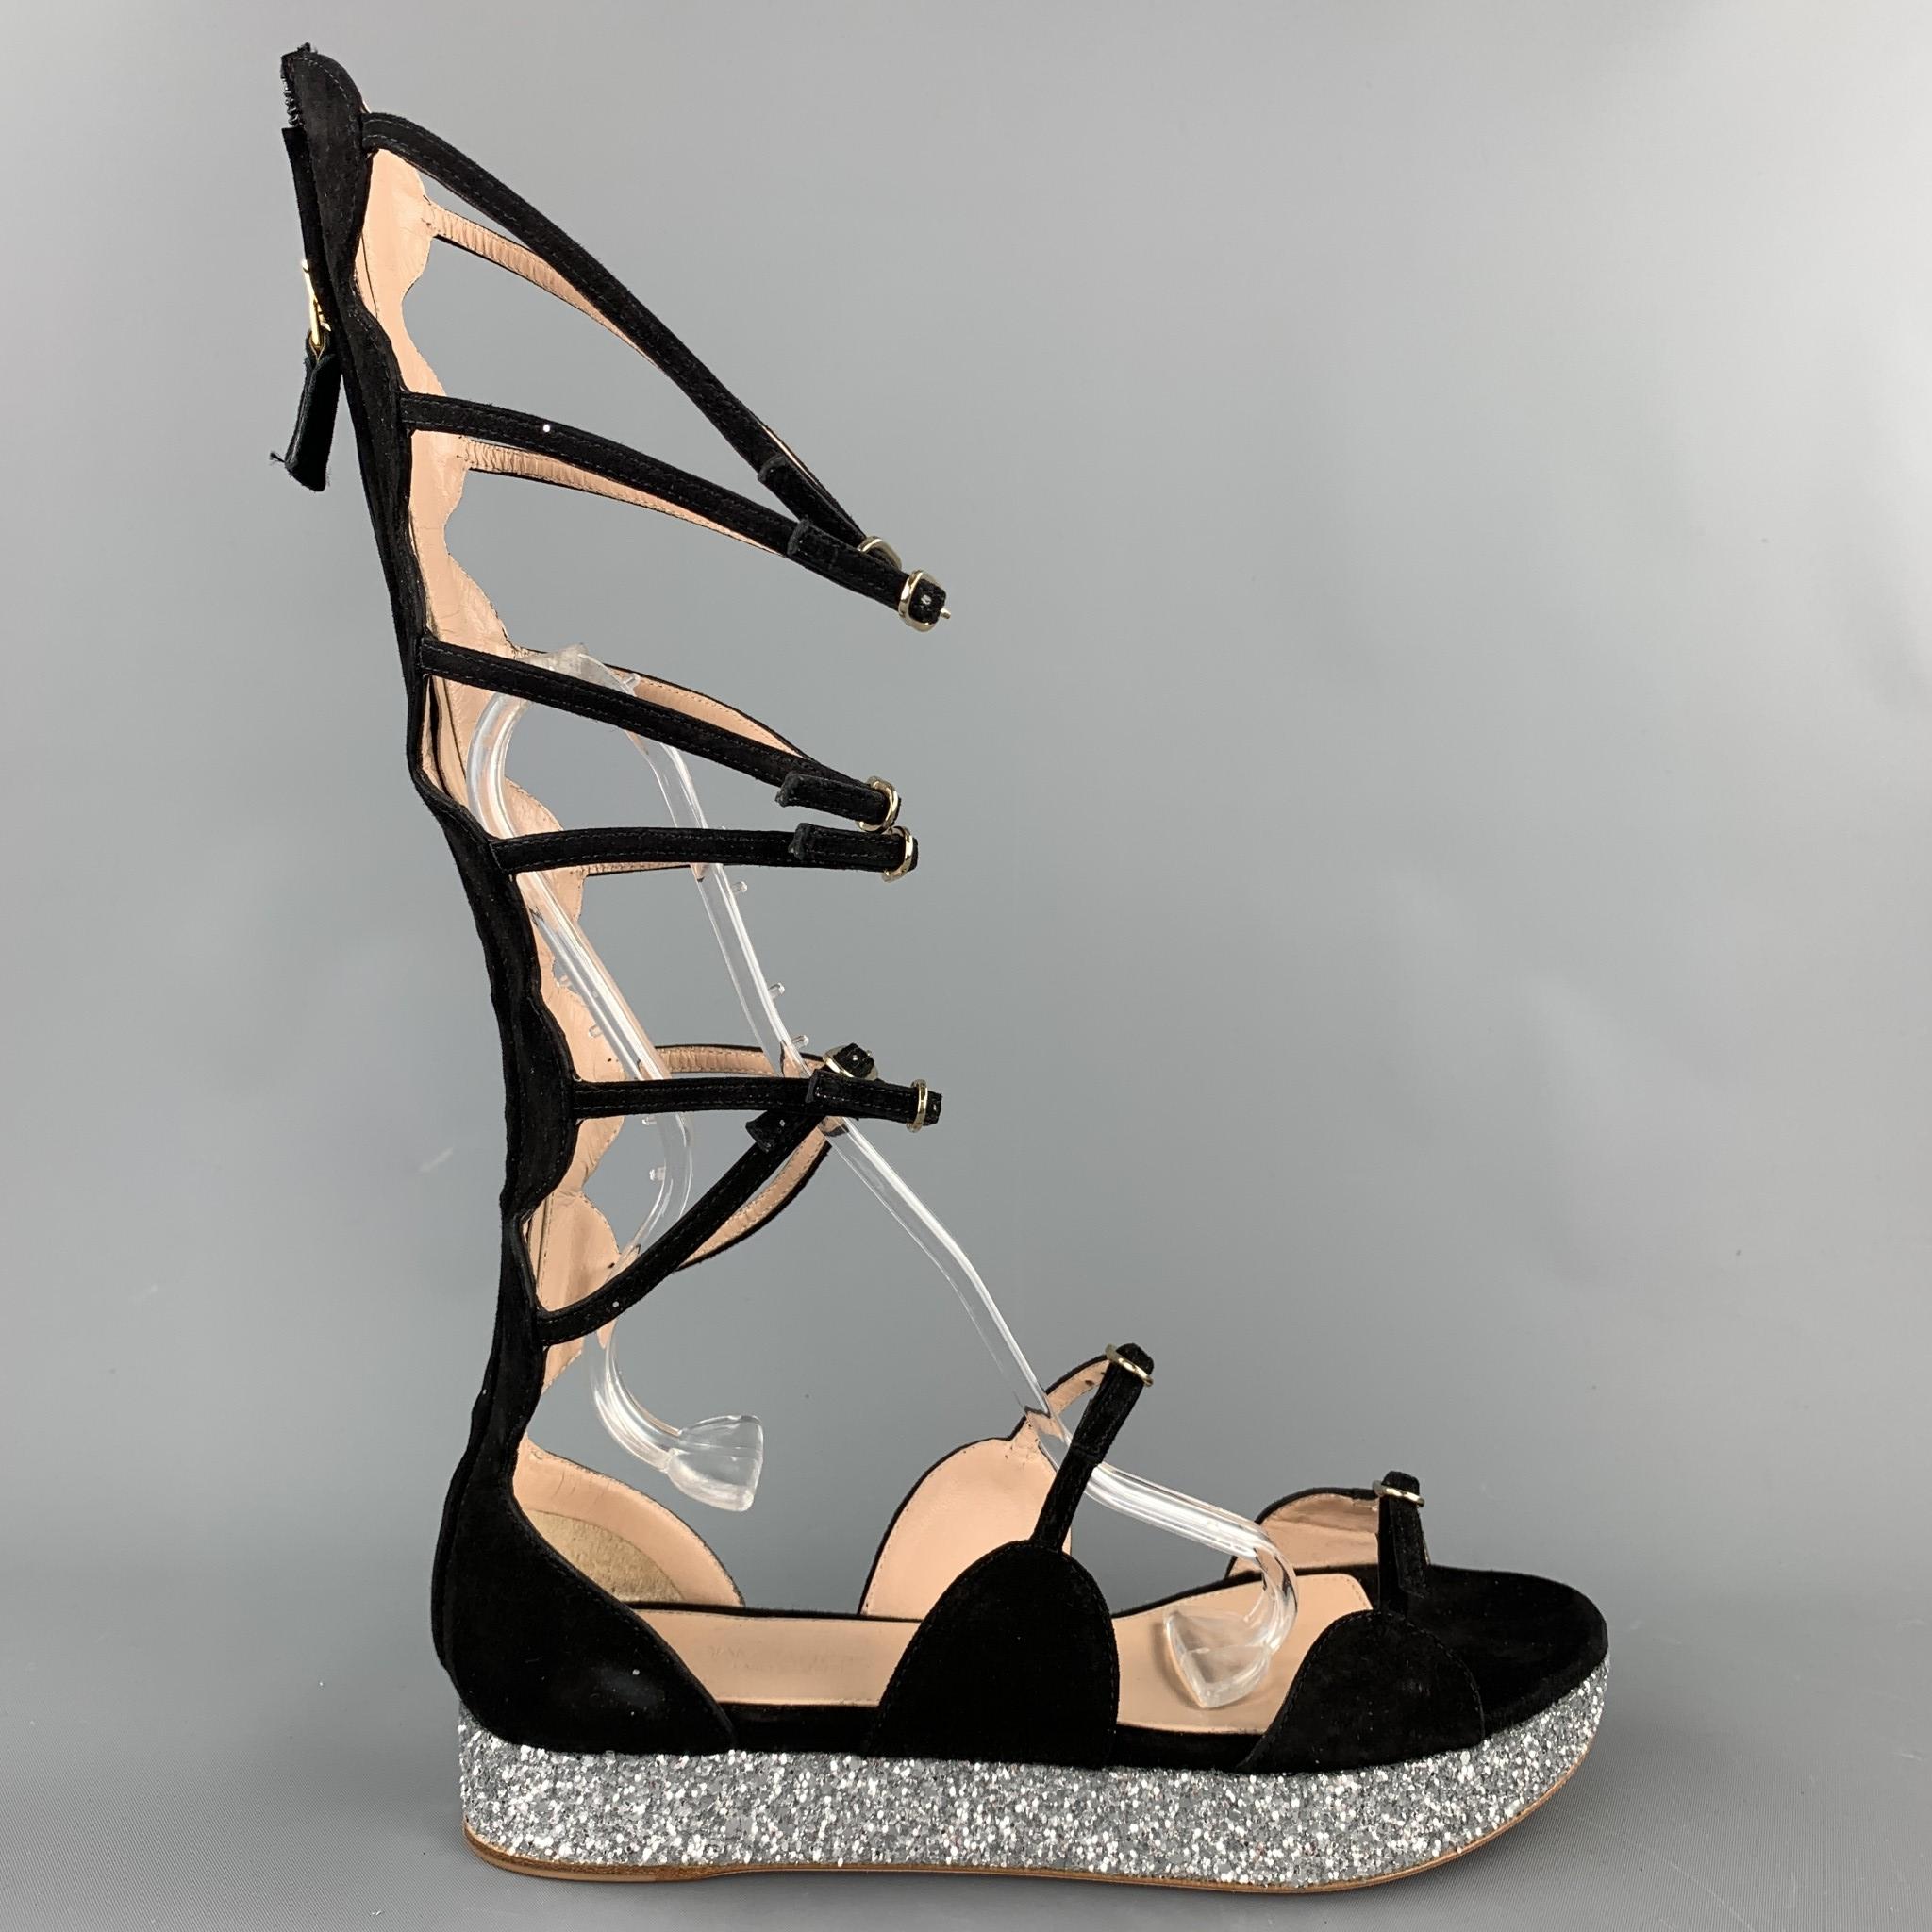 GIAMBATTISTA VALLI sandals comes in a black suede with a glitter platform detail featuring a gladiator style and a back zip up closure. Comes with box. Made in Italy.

Very Good Pre-Owned Condition.
Marked: IT 38
Original Retail Price: